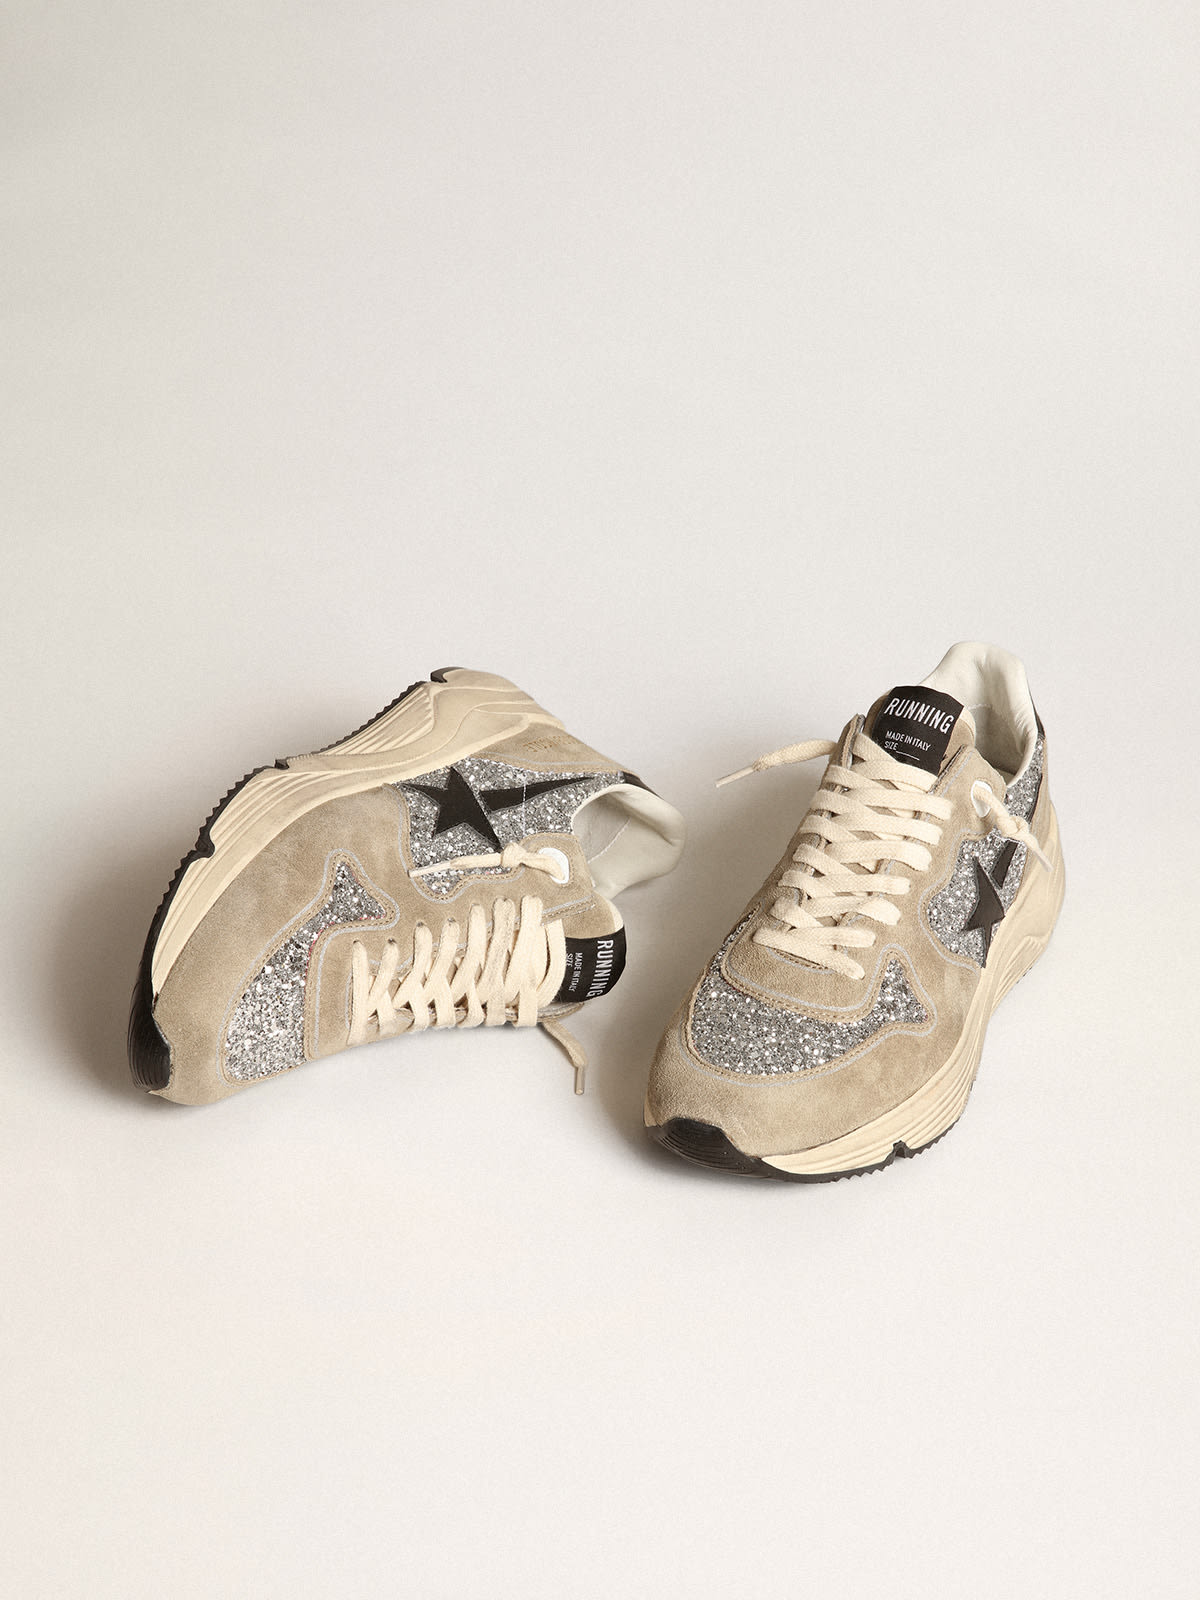 Golden Goose - Running Sole sneakers in silver glitter and dove-gray suede with black leather star in 